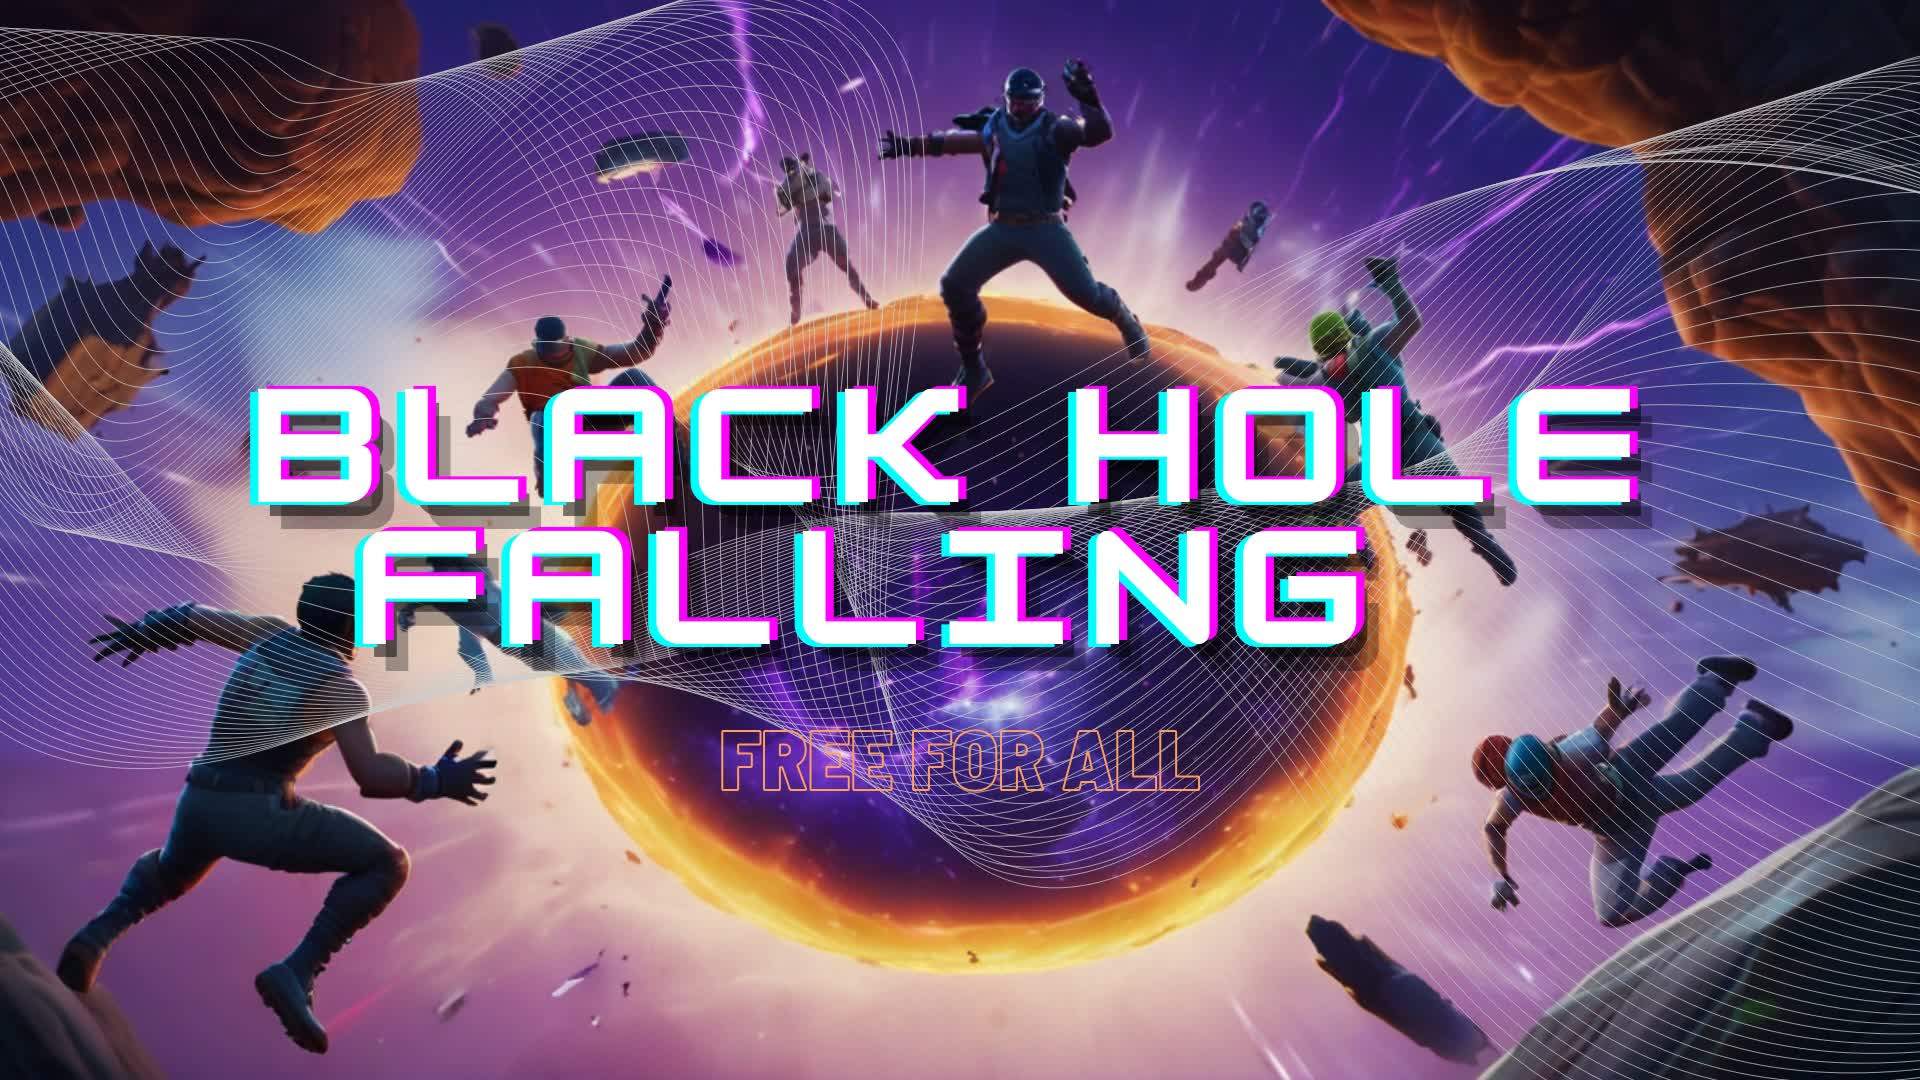 Fighting falling into a black hole